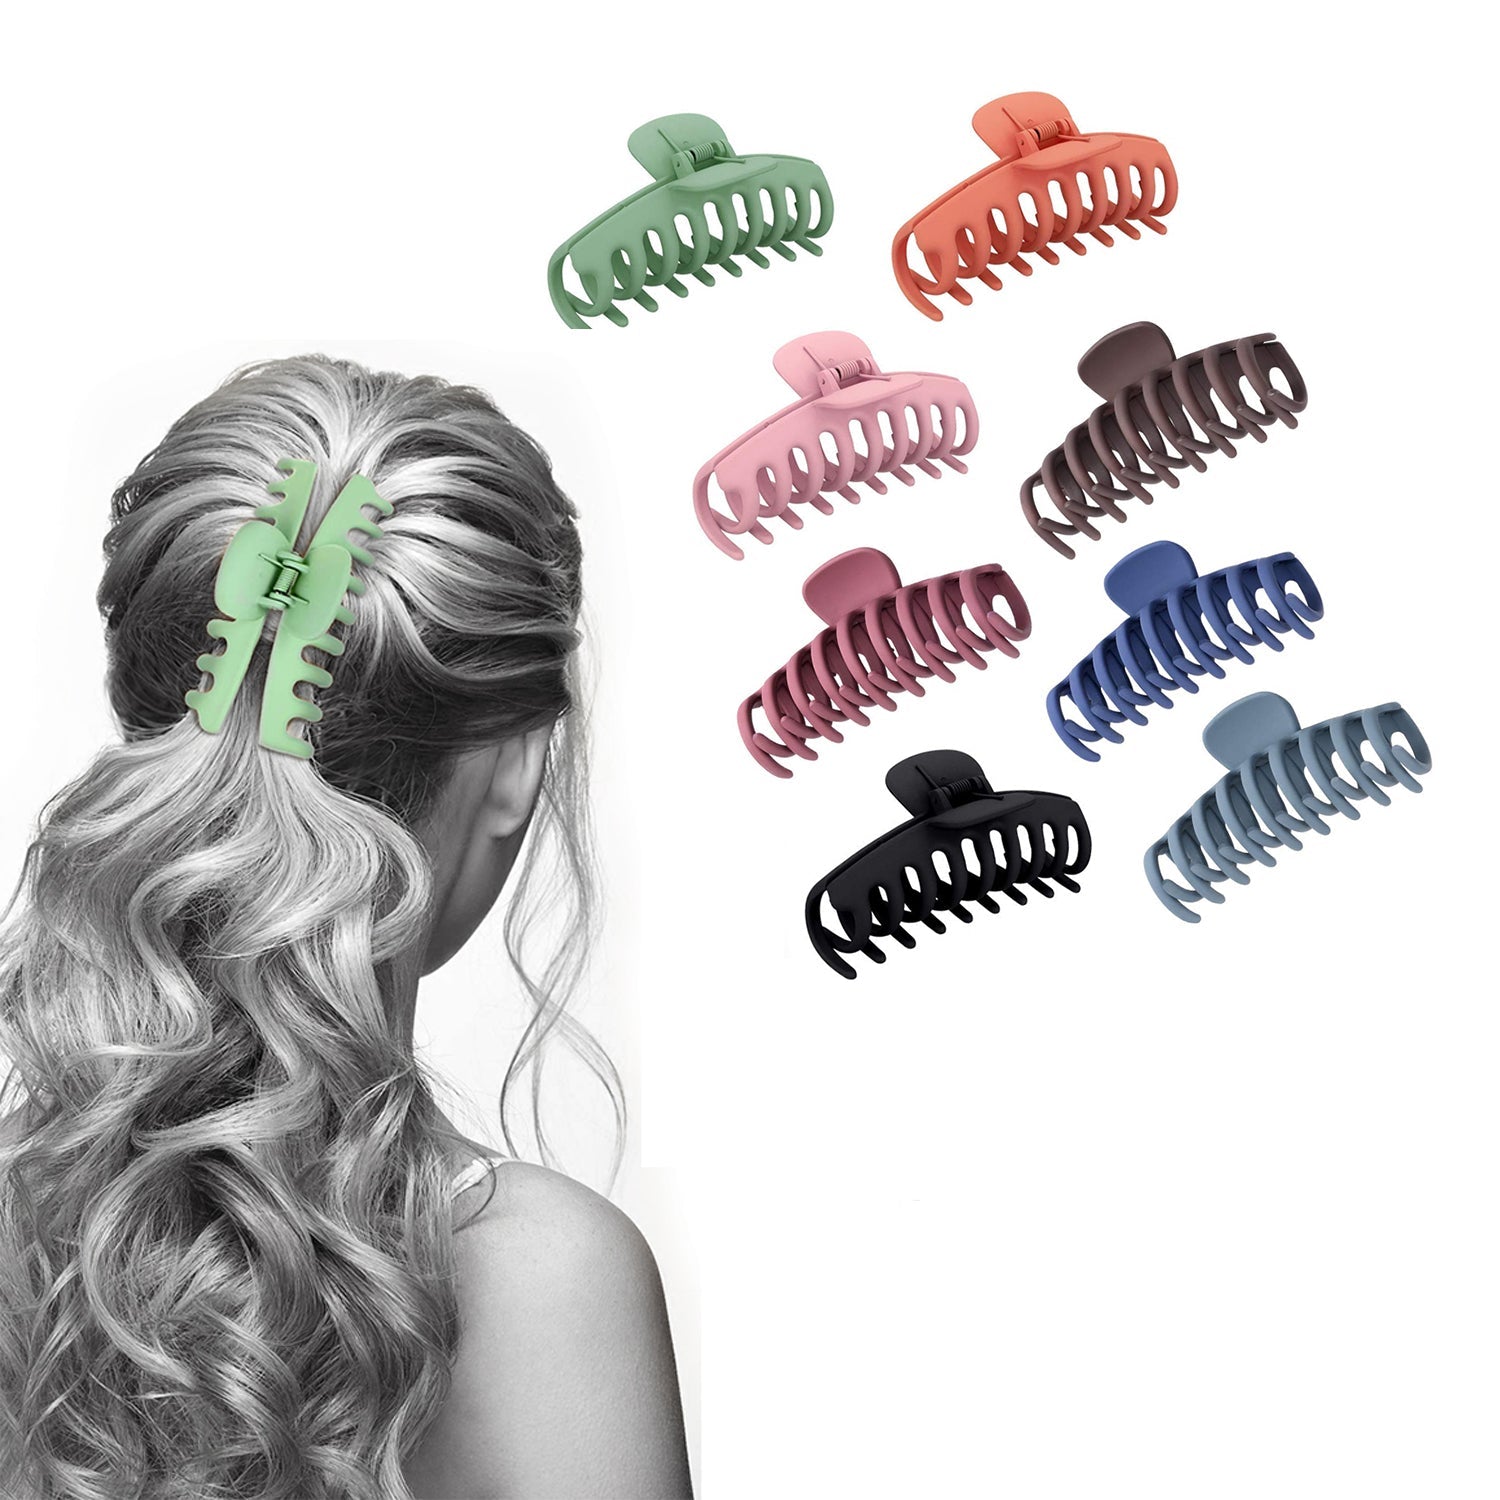 8-Pack: Women's Acrylic Large Claw Matt Hair Clips For Styling And Grip